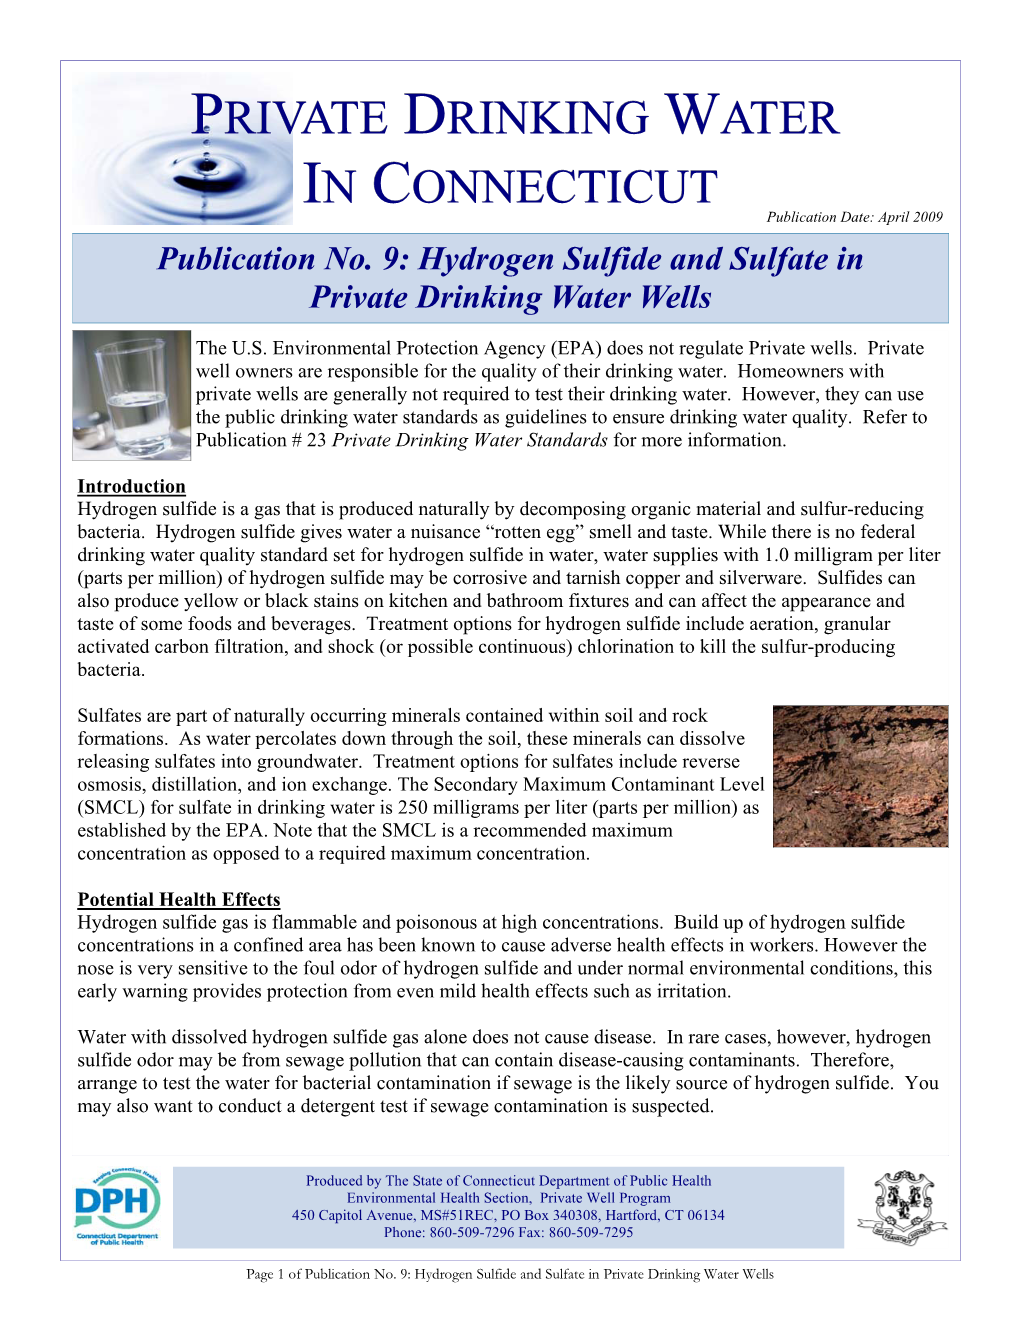 09 Hydrogen Sulfide and Sulfate in Private Drinking Water Wells